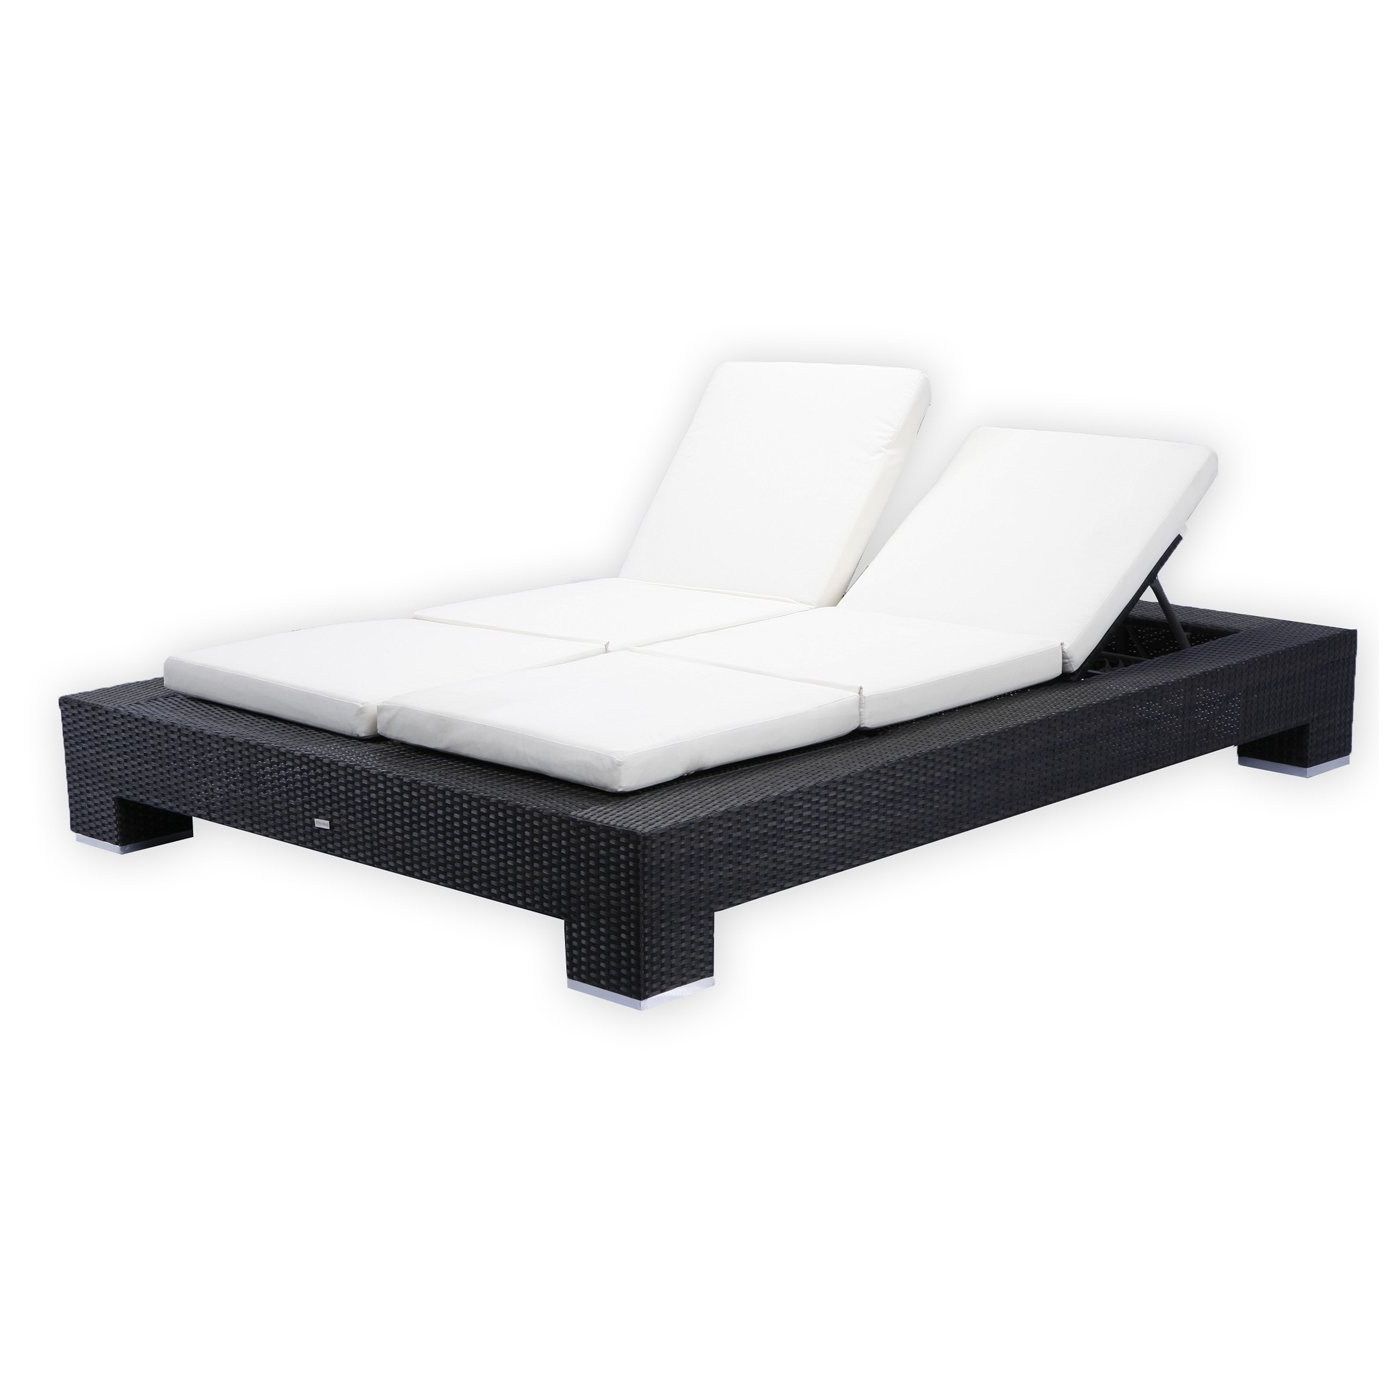 Well Known Popular Of Double Chaise Lounge Outdoor With Kidkraft Outdoor Regarding Outdoor Double Chaises (View 12 of 15)